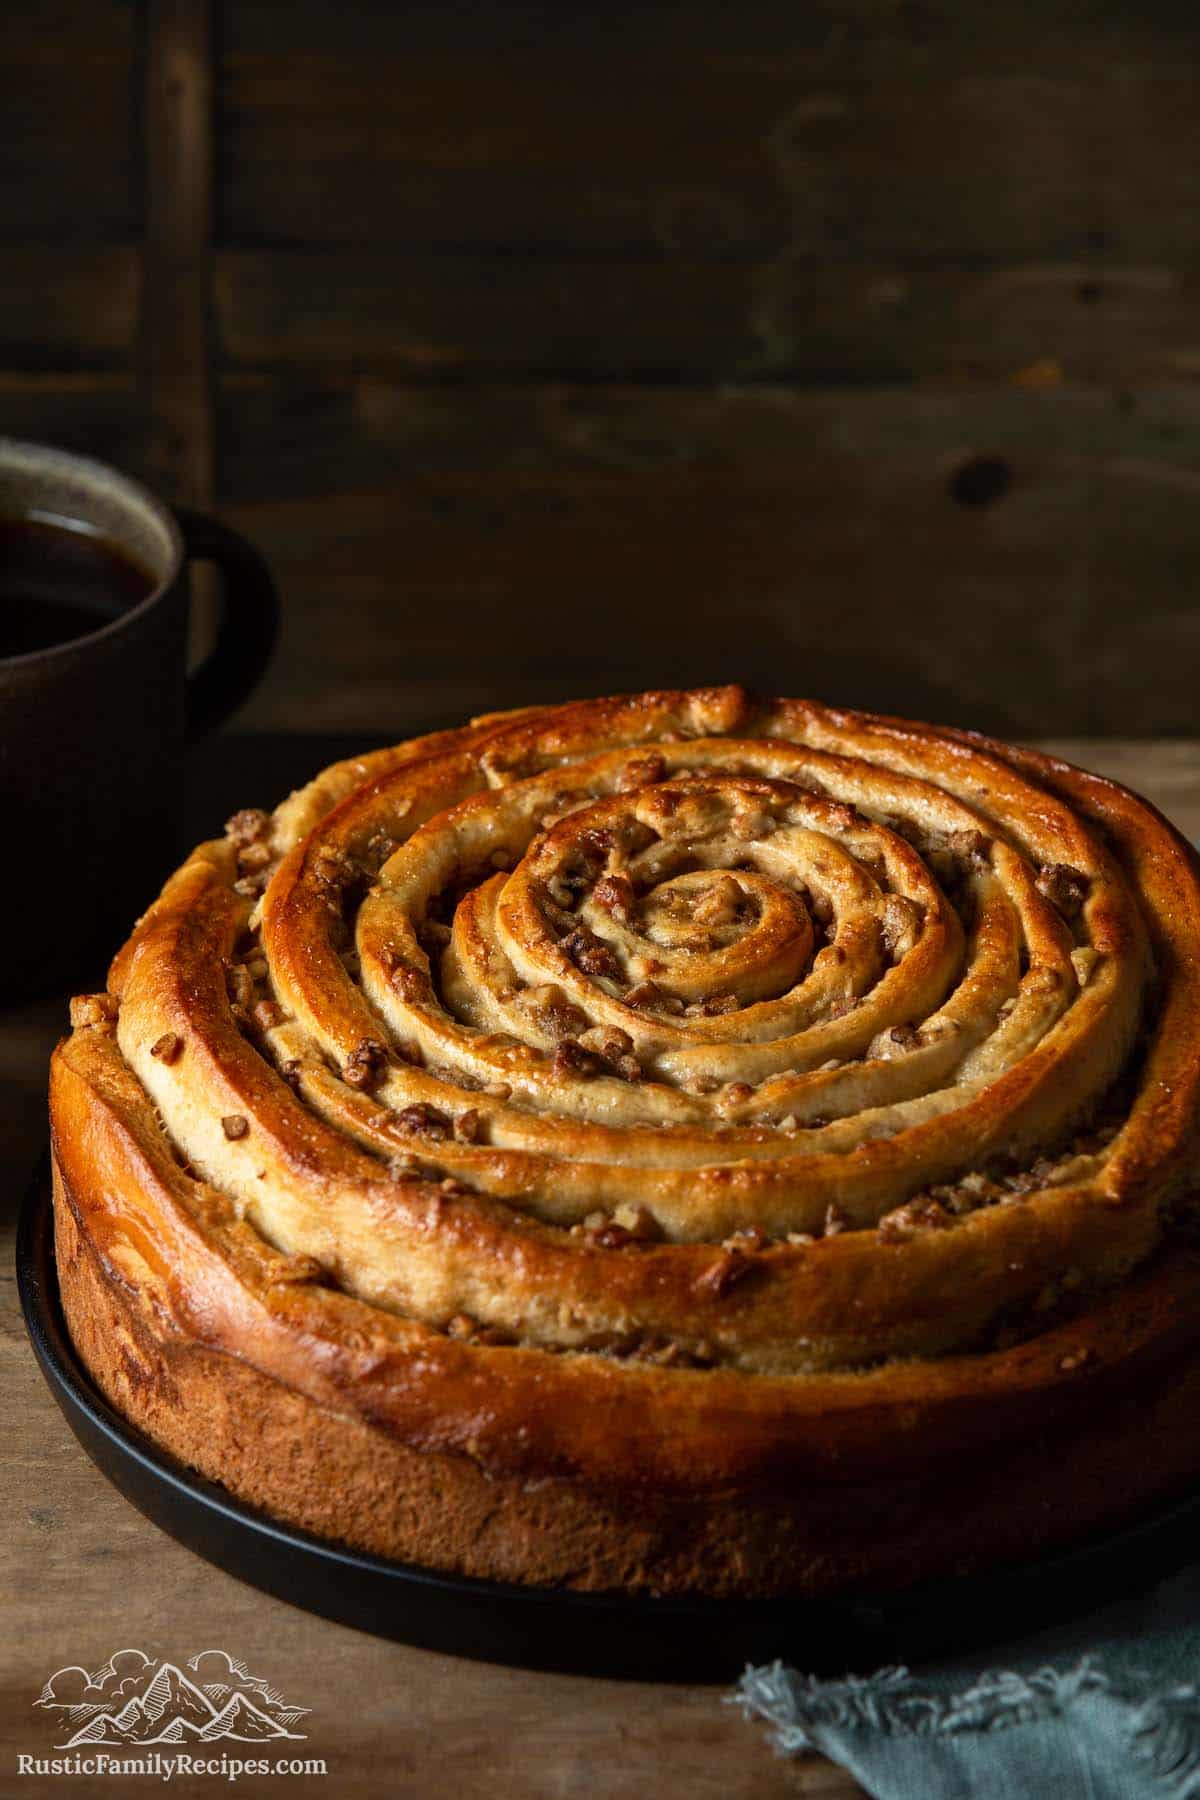 Spiral coffee cake on rustic wooden table with coffee mug in background